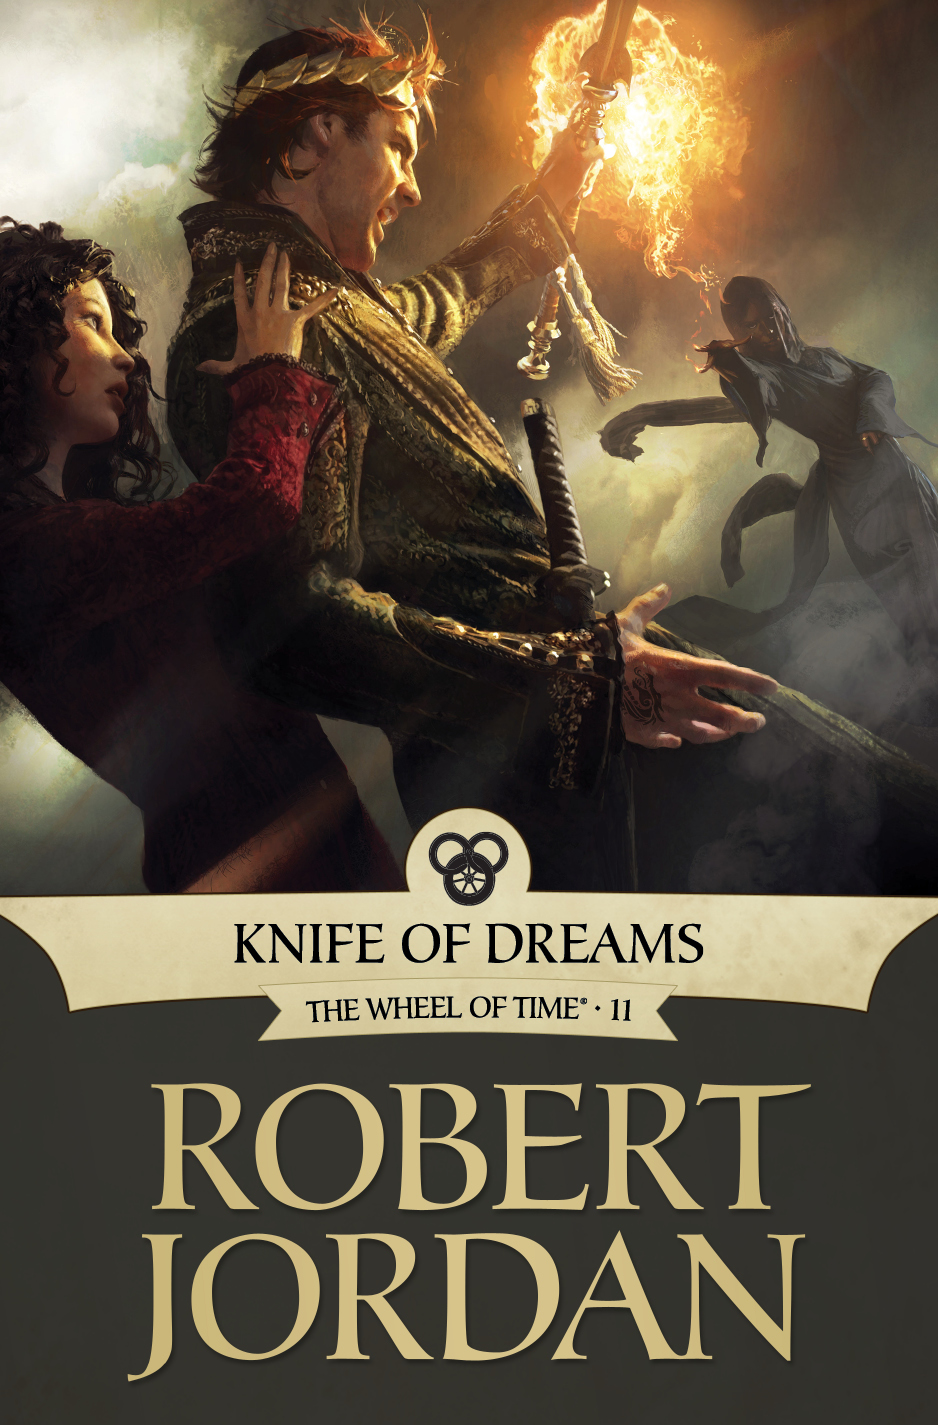 Knife of Dreams E-book Cover by Michael Komarck